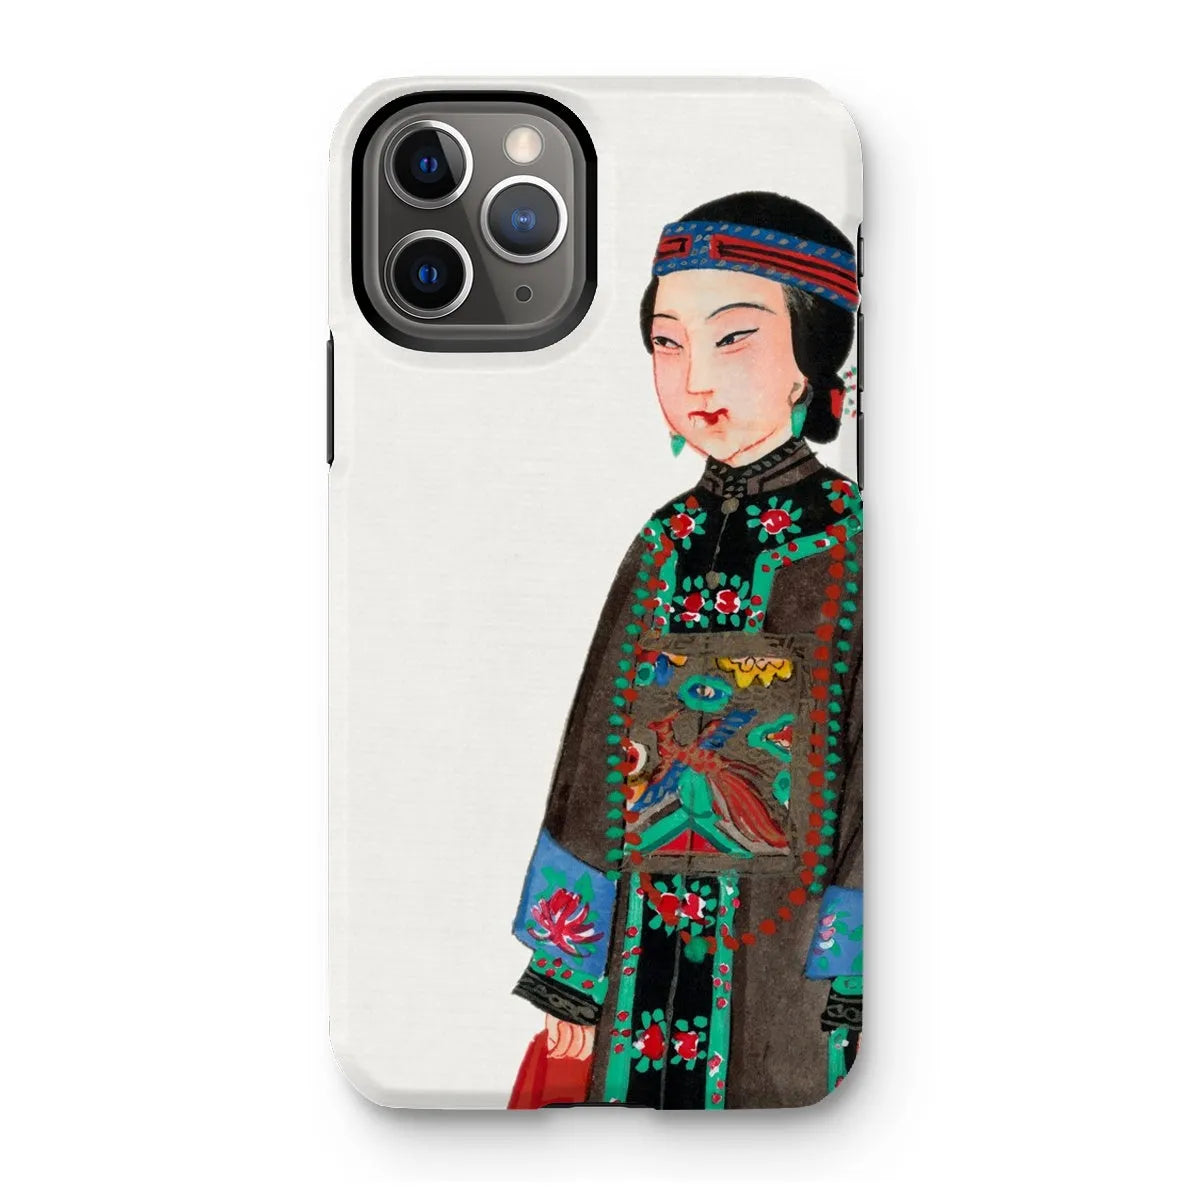 Noblewoman At Court - Chinese Aesthetic Art Phone Case - Iphone 11 Pro / Matte - Mobile Phone Cases - Aesthetic Art